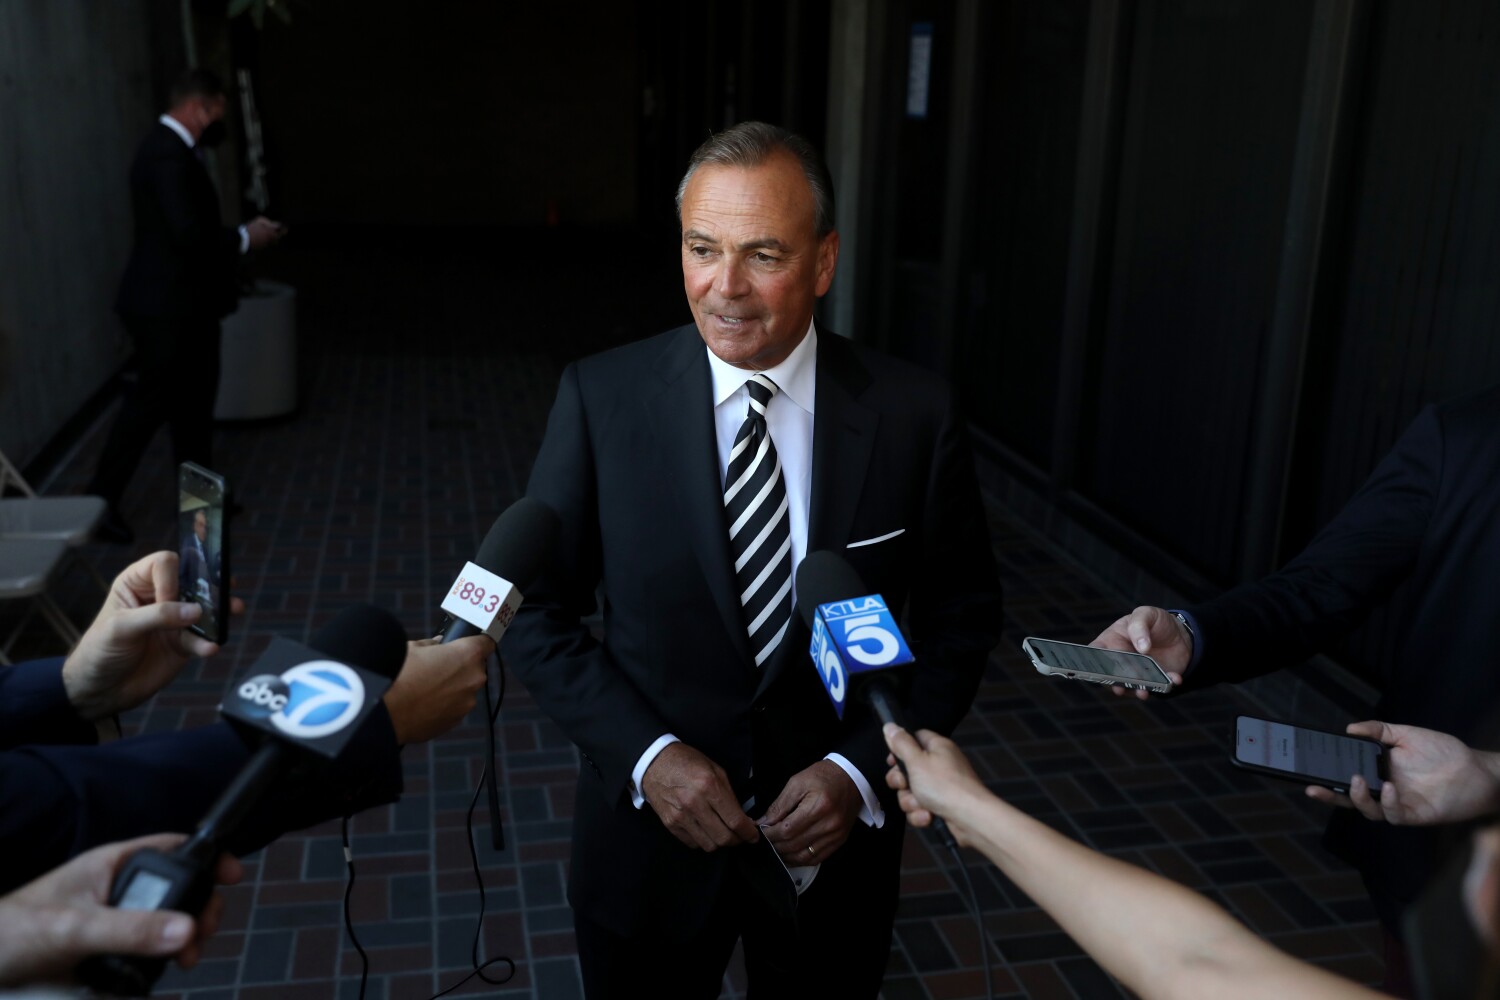 Rick Caruso missed nearly 40% of meetings as LAPD commissioner